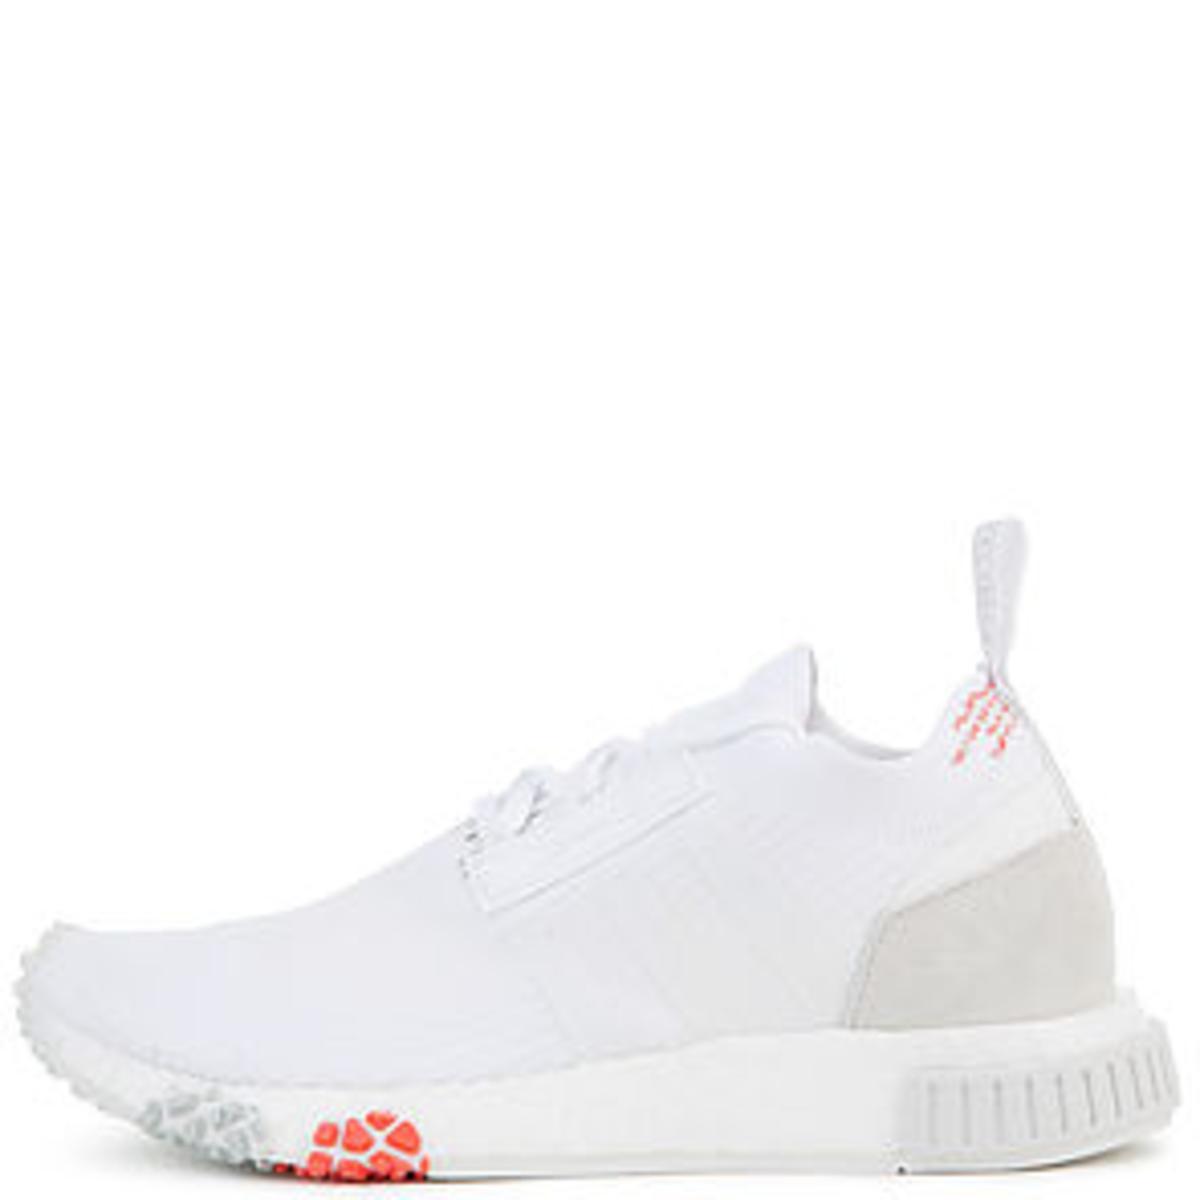 adidas Rubber The Nmd Racer Primeknit 